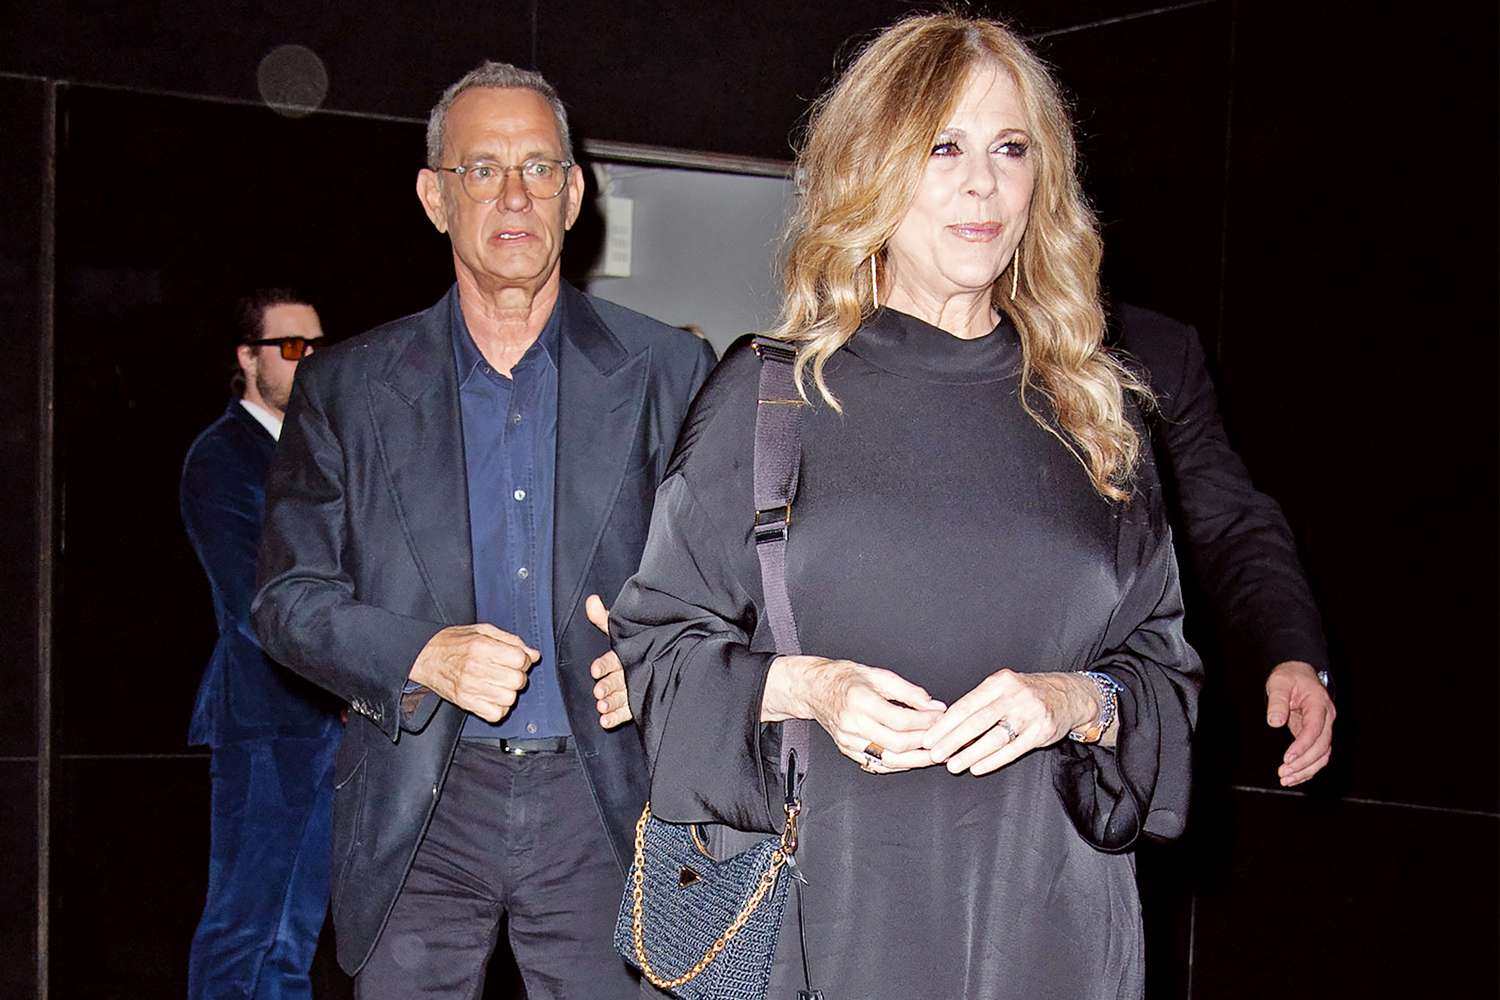 Tom hanks spotted for the first time since health scare with his wife Rita wilson in New York City Pictured: Tom Hanks,Rita Wilson Ref: SPL5319197 150622 NON-EXCLUSIVE Picture by: WavyPeter / SplashNews.com Splash News and Pictures USA: +1 310-525-5808 London: +44 (0)20 8126 1009 Berlin: +49 175 3764 166 photodesk@splashnews.com World Rights